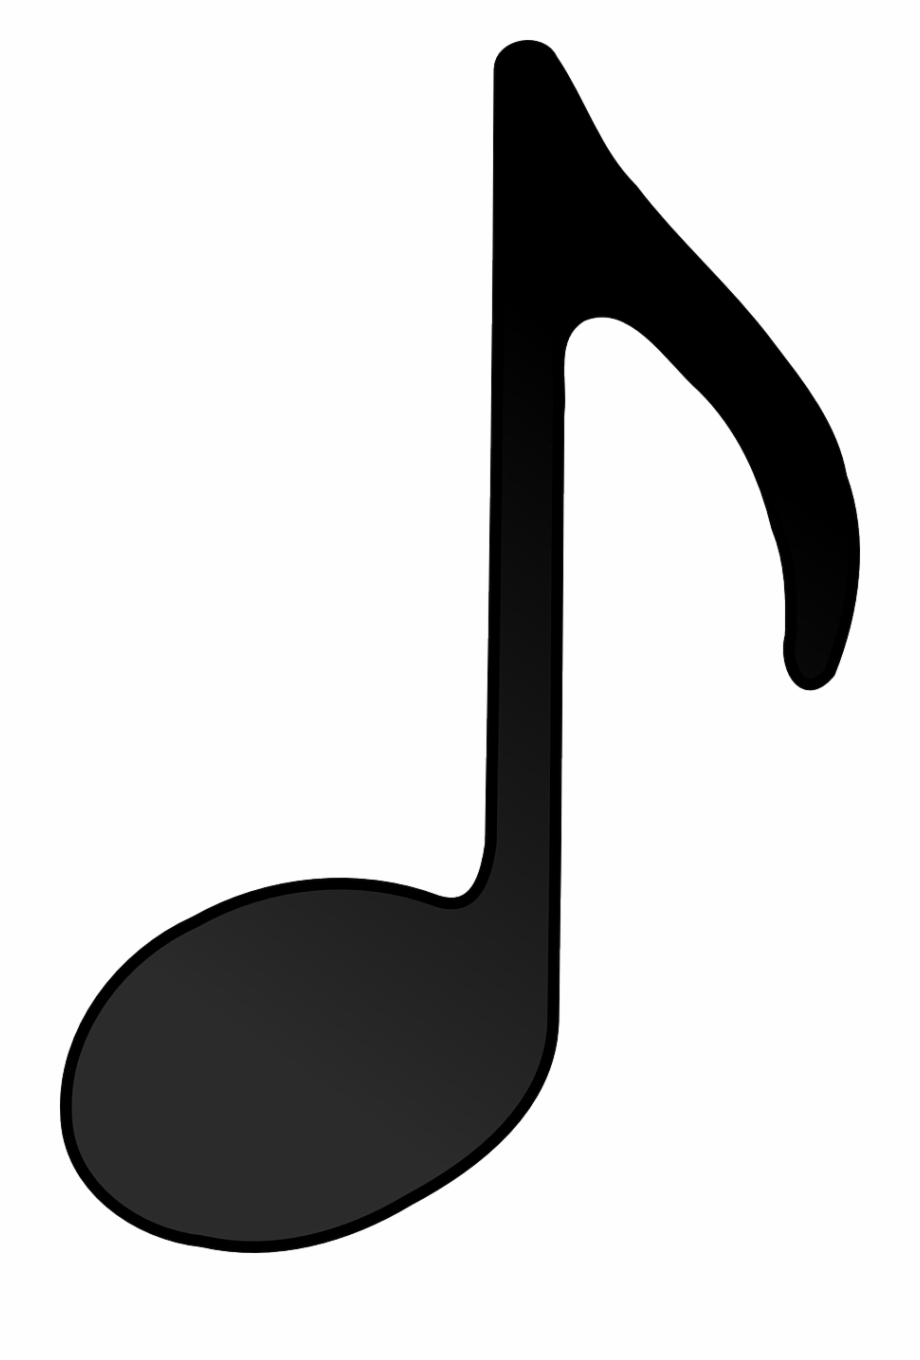 eighth note clipart
